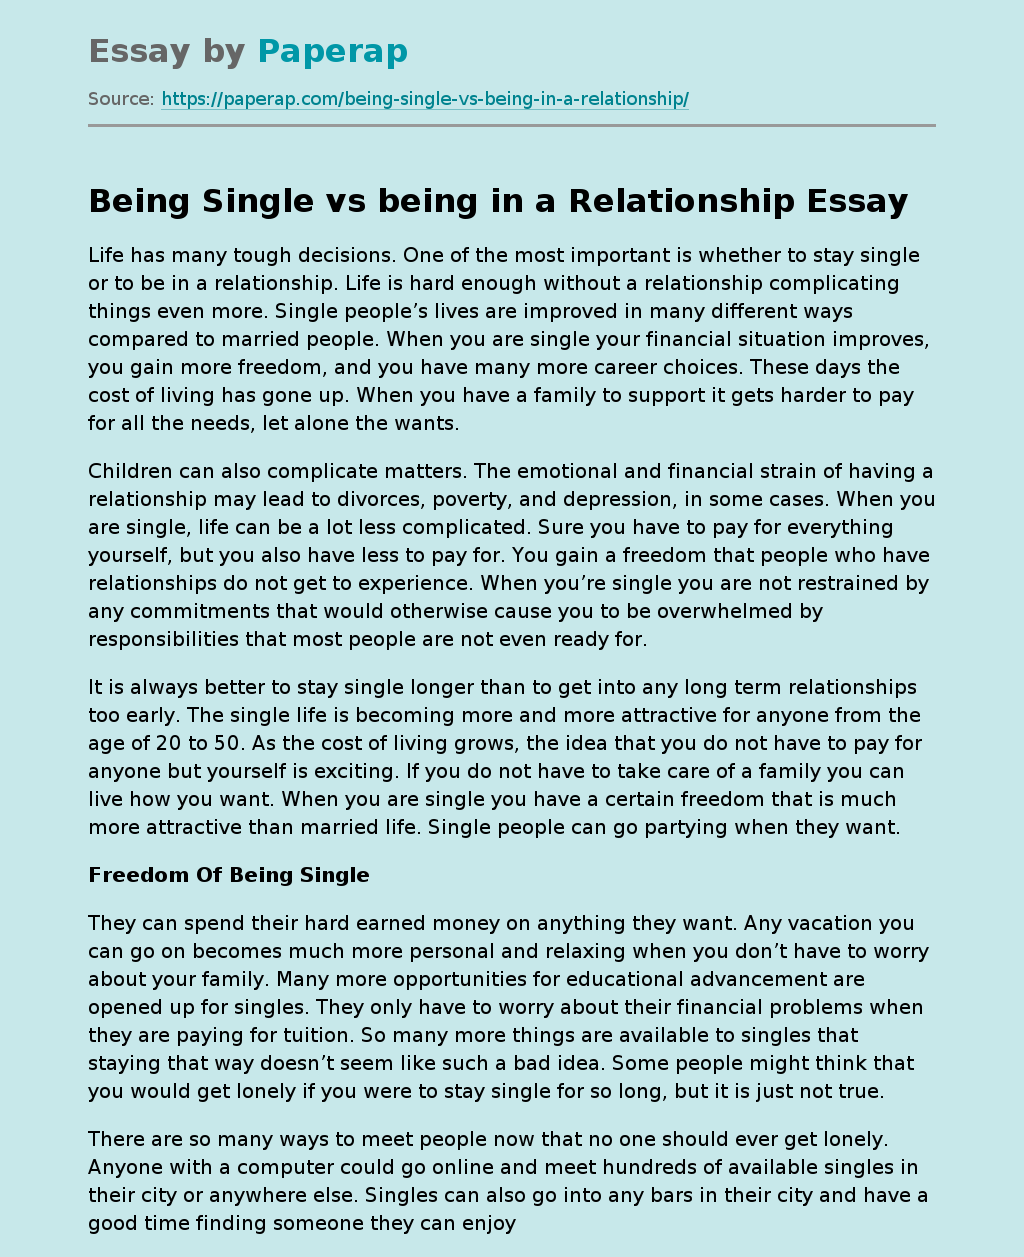 Being Single vs being in a Relationship